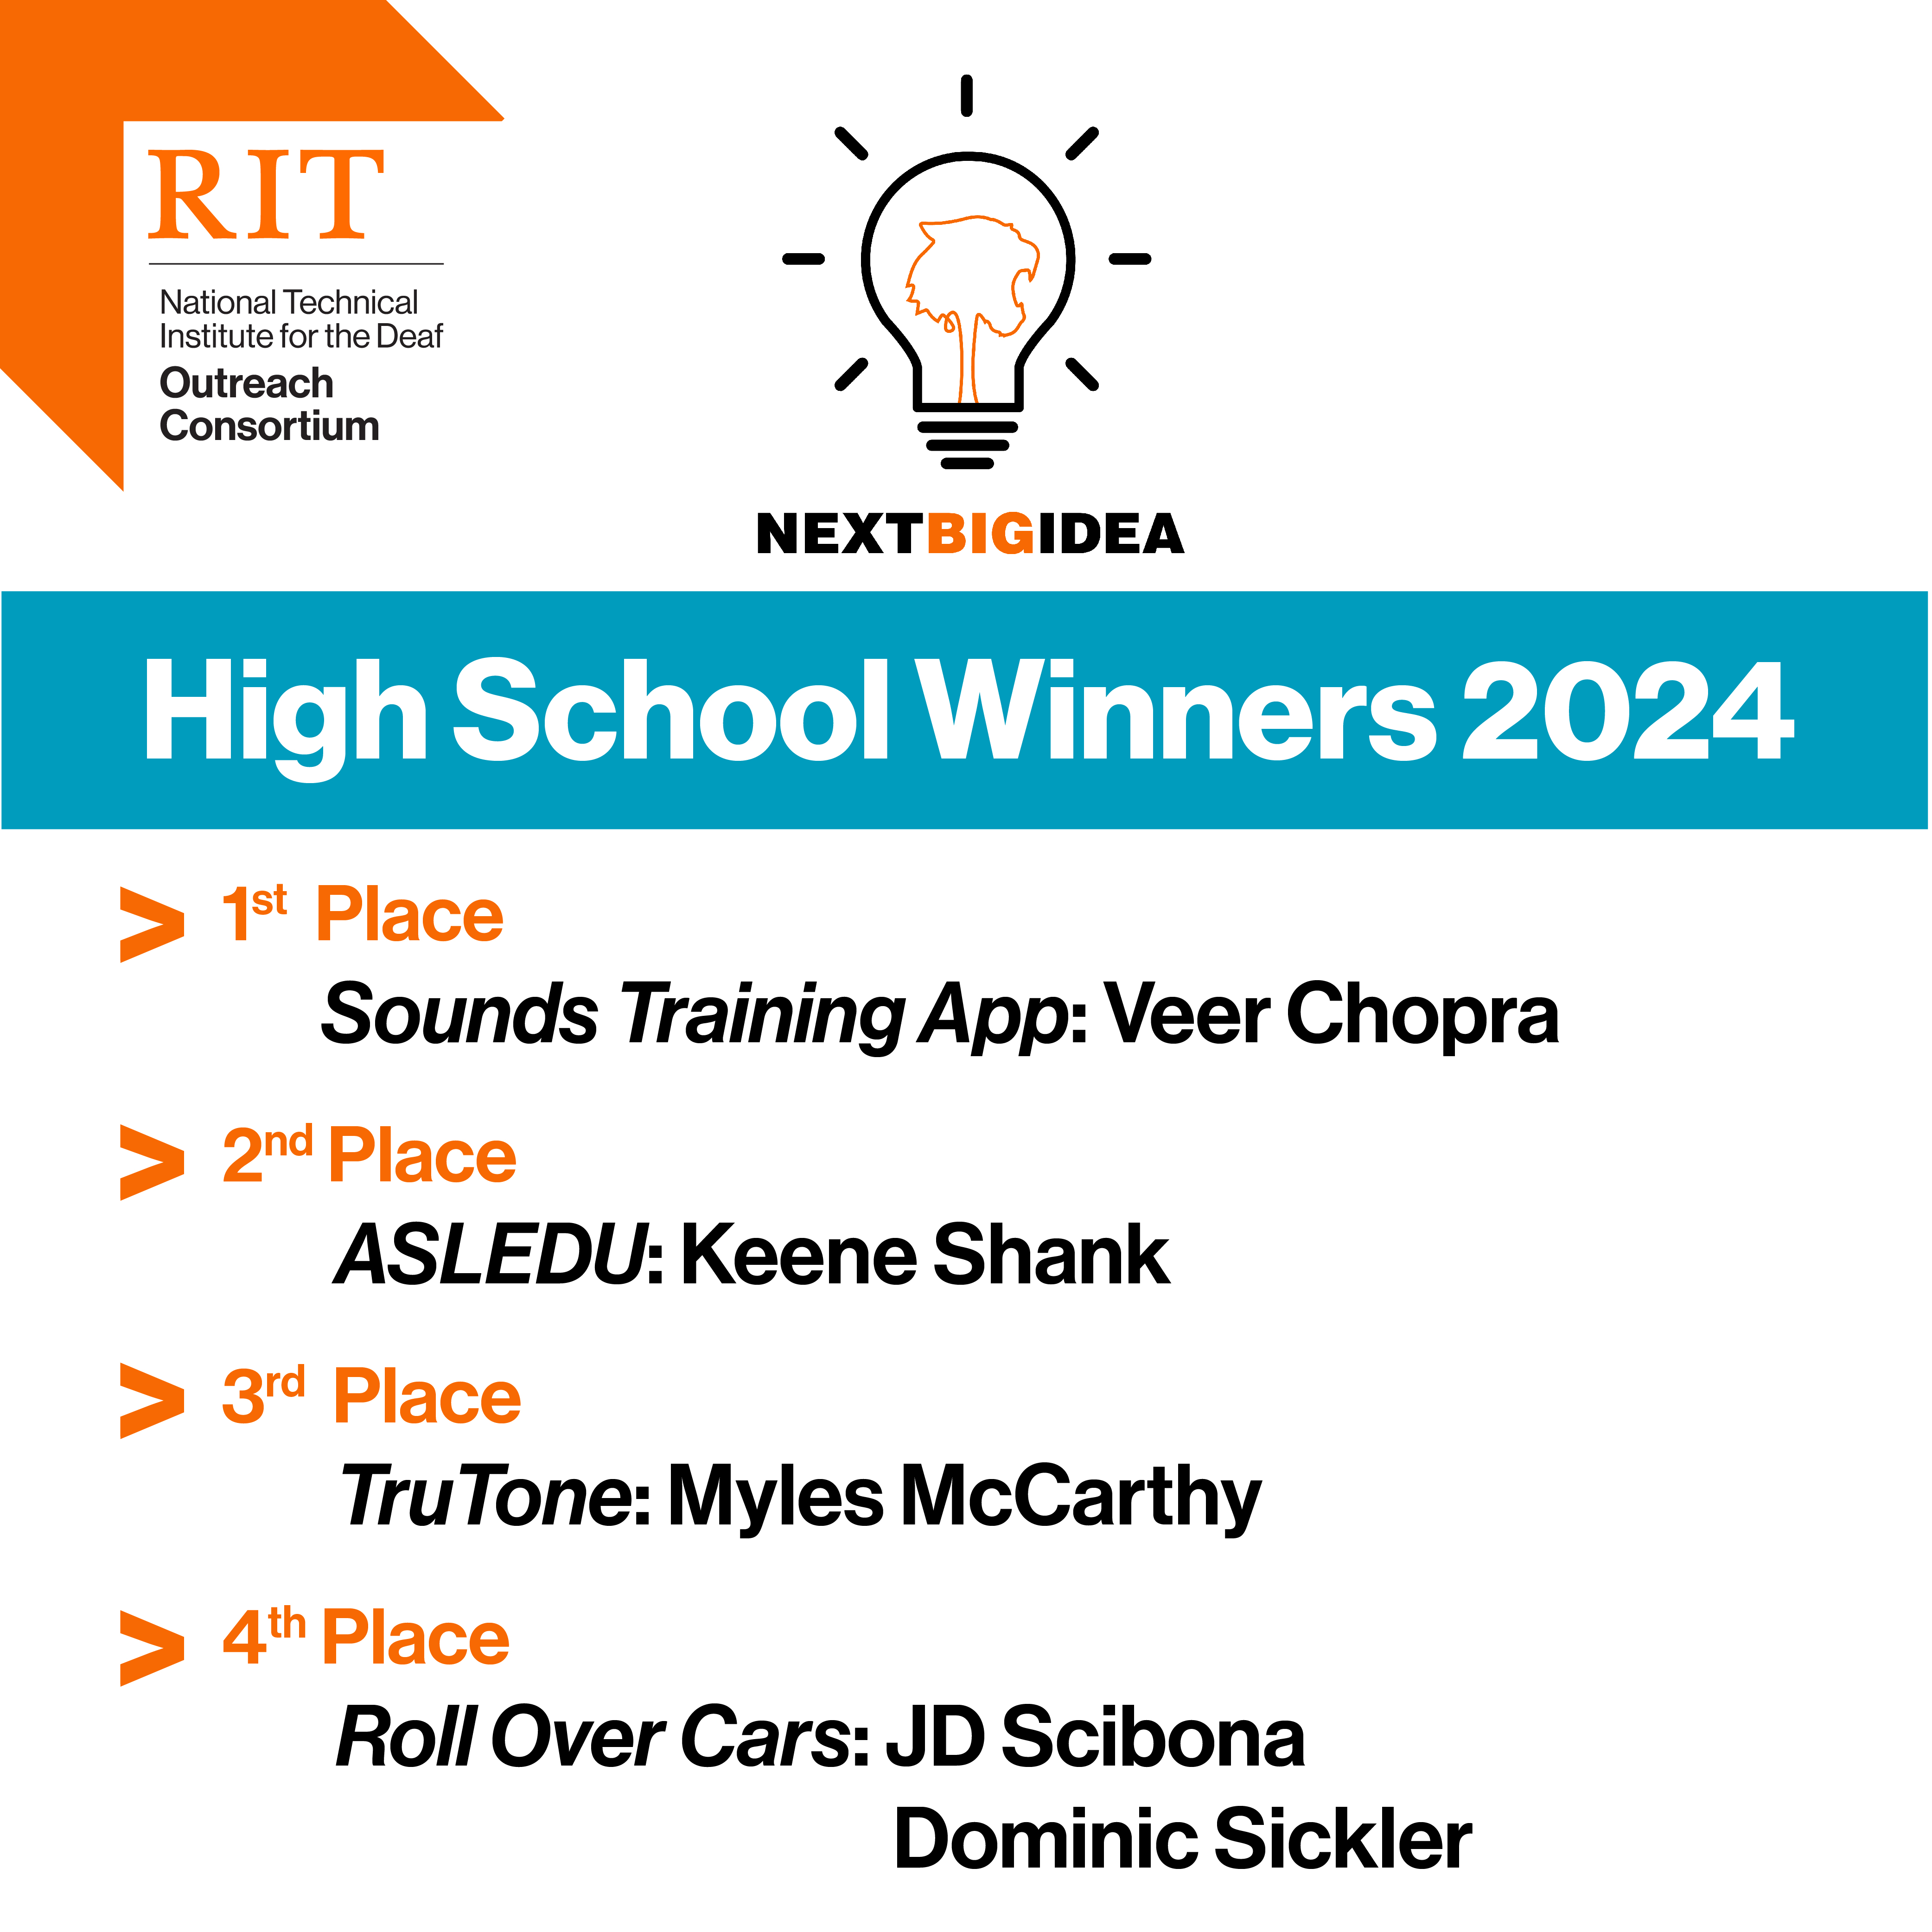 Graphic displaying the winners of the Next Big Idea: High School 2024 event. The top half of the graphic displays two logos – an RIT/NTID Outreach logo at the top left, and the Next Big Idea logo in the middle. The bottom half of the graphic displays the winners with the text “High School Winners 2024: 1st place – Sounds Training App: Veer Chopra. 2nd place – ASLEDU: Keene Shank. 3rd place – TruTone: Myles McCarthy. 4th place – Roll Over Cars: JD Scibona, Dominic Sickler.